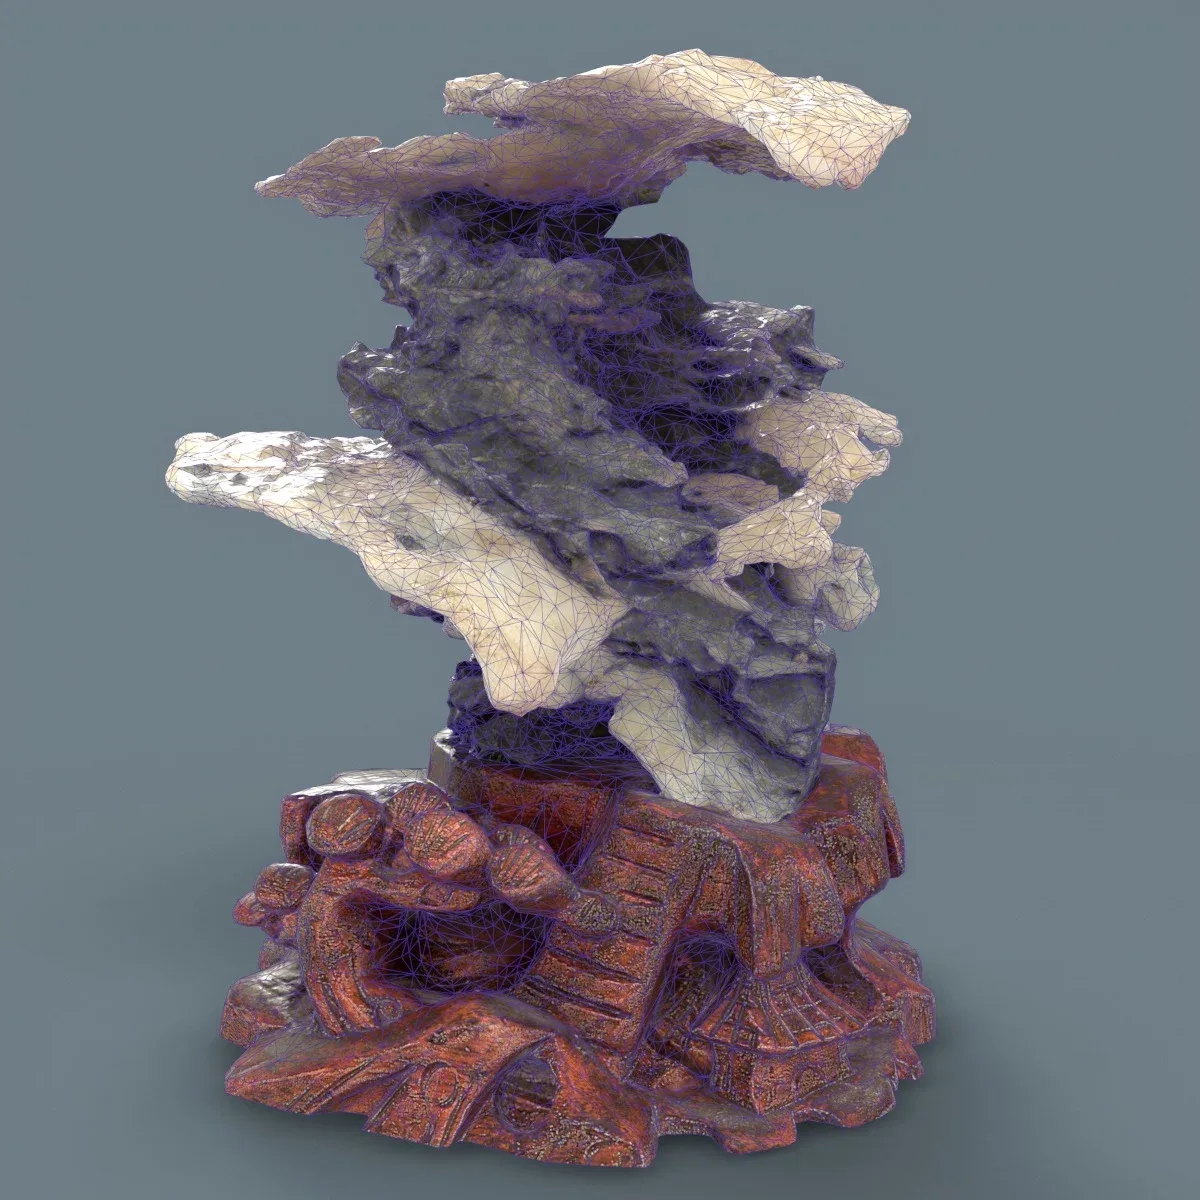 Suiseki Stone 19 from Japan - High-Quality 3D Model with Metallic-Roughness PBR Textures for Games, VR, and Art Projects